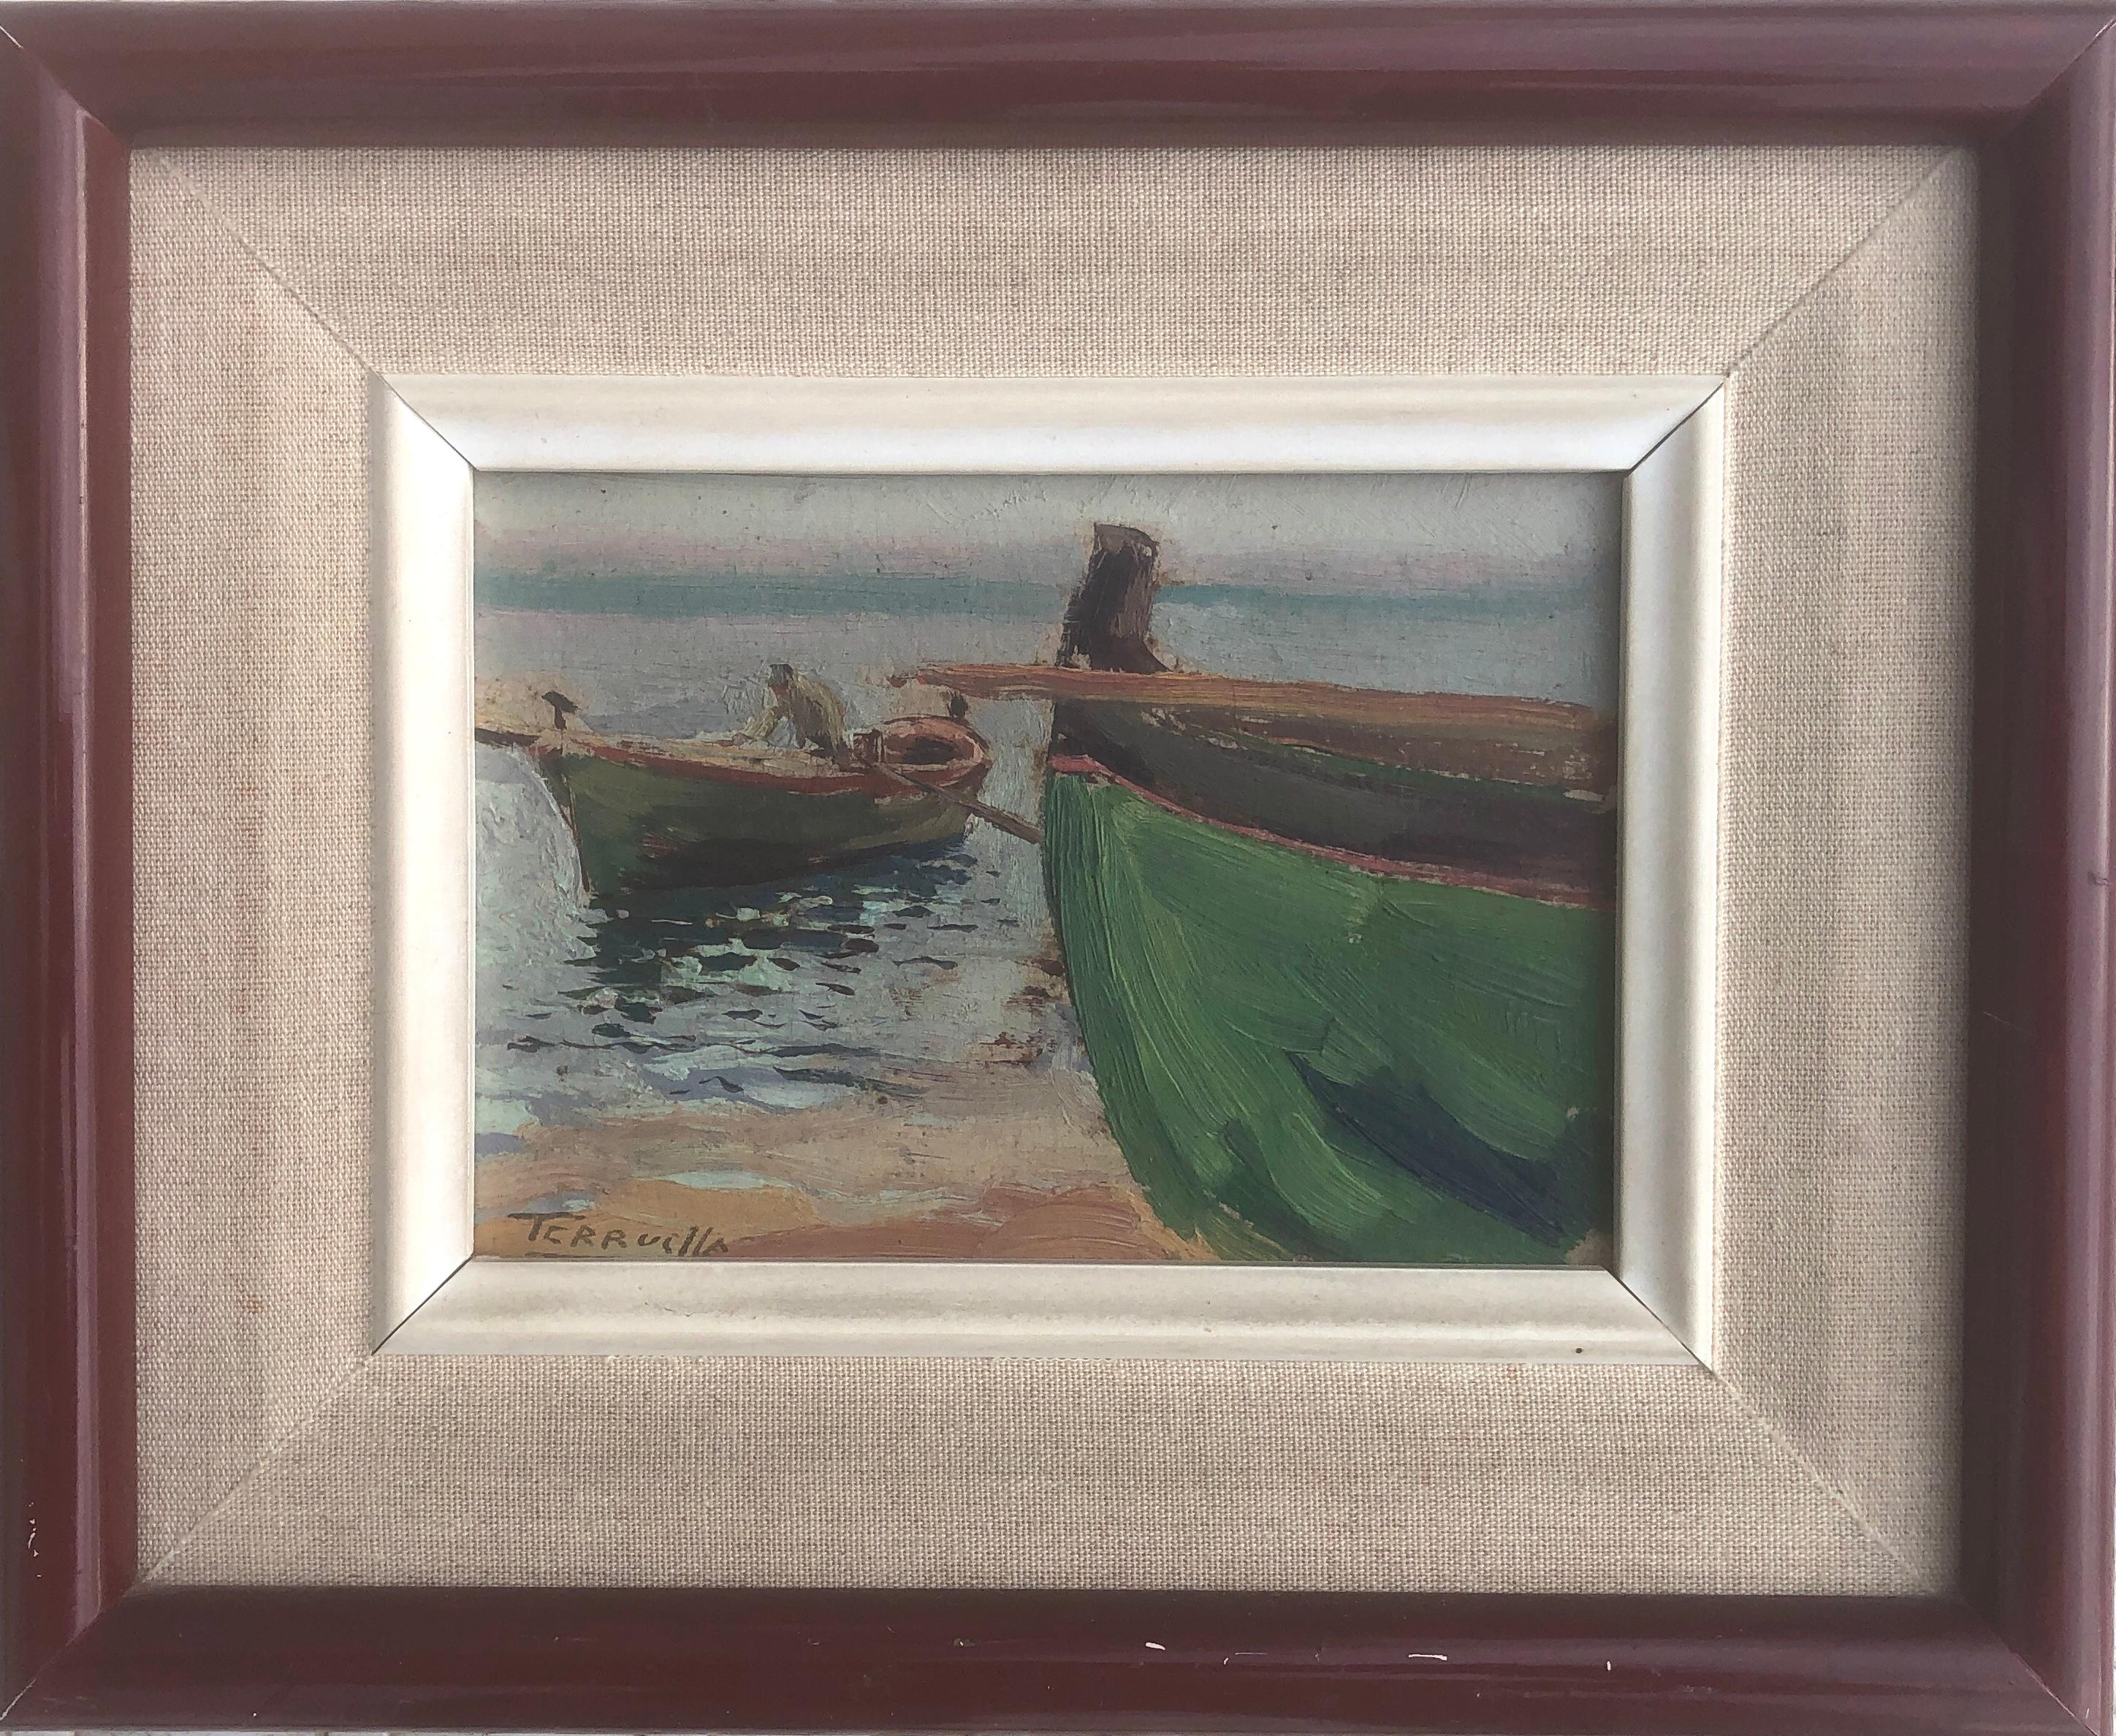 Boats on the beach oil on cardboard painting impressionism spanish seascape - Painting by Joaquin Terruella Matilla